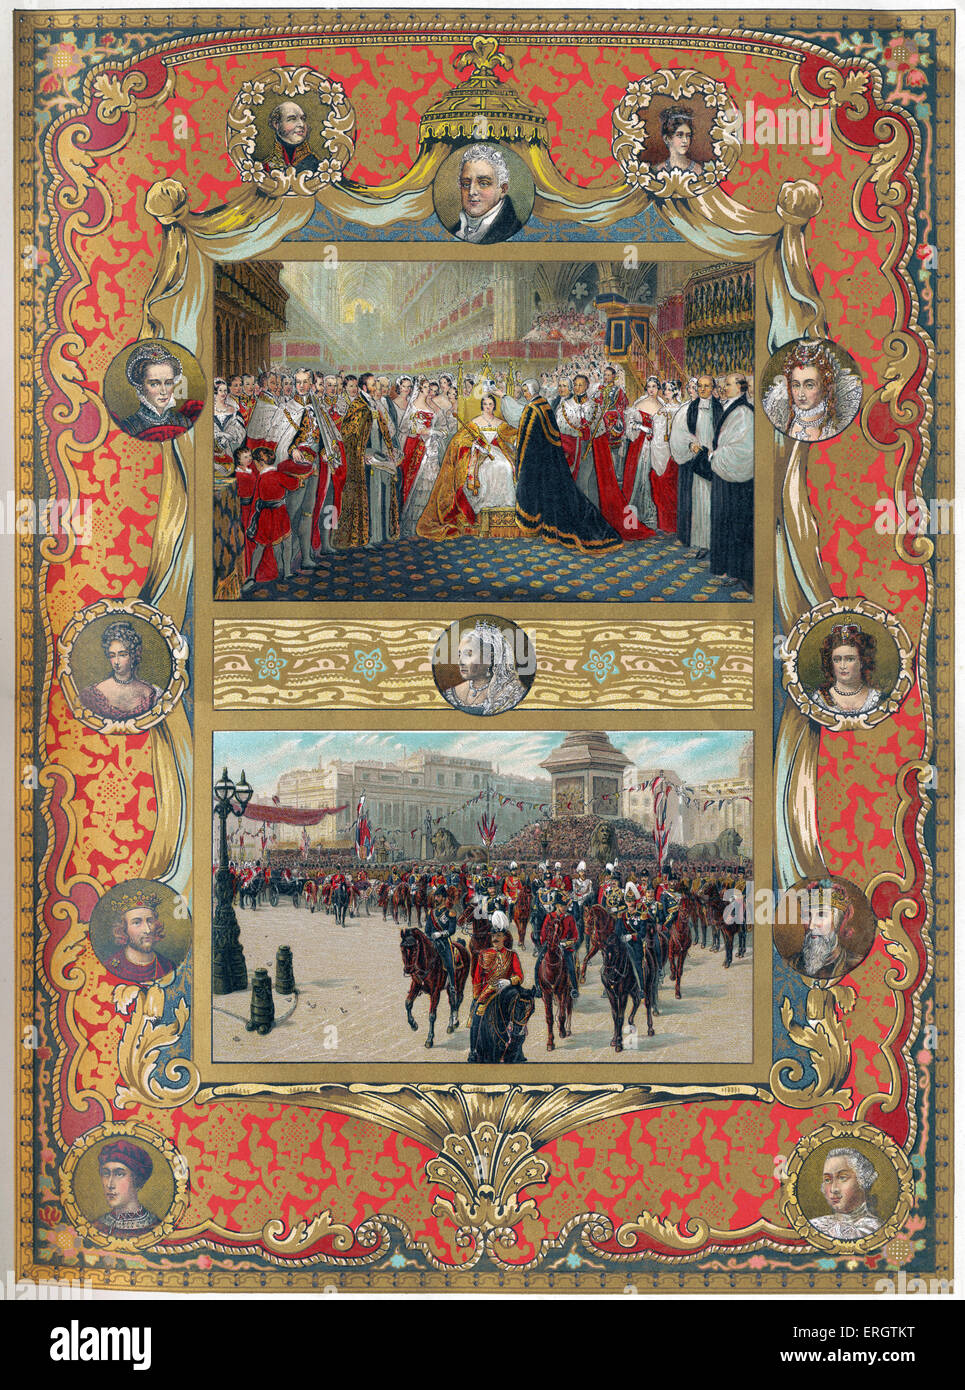 Queen Victoria of England - Her Majesty 's coronation (top,1837) and jubilee procession (bottom, 1887). 24 May 1819 – 22 January 1901. With portraits of Duke of Kent, Mary I, Mary II, Henry III, Henry VI, William IV, Queen Victoria, Duchess of Kent, Queen Elizabeth, Queen Anne, Edward III and George III. Stock Photo